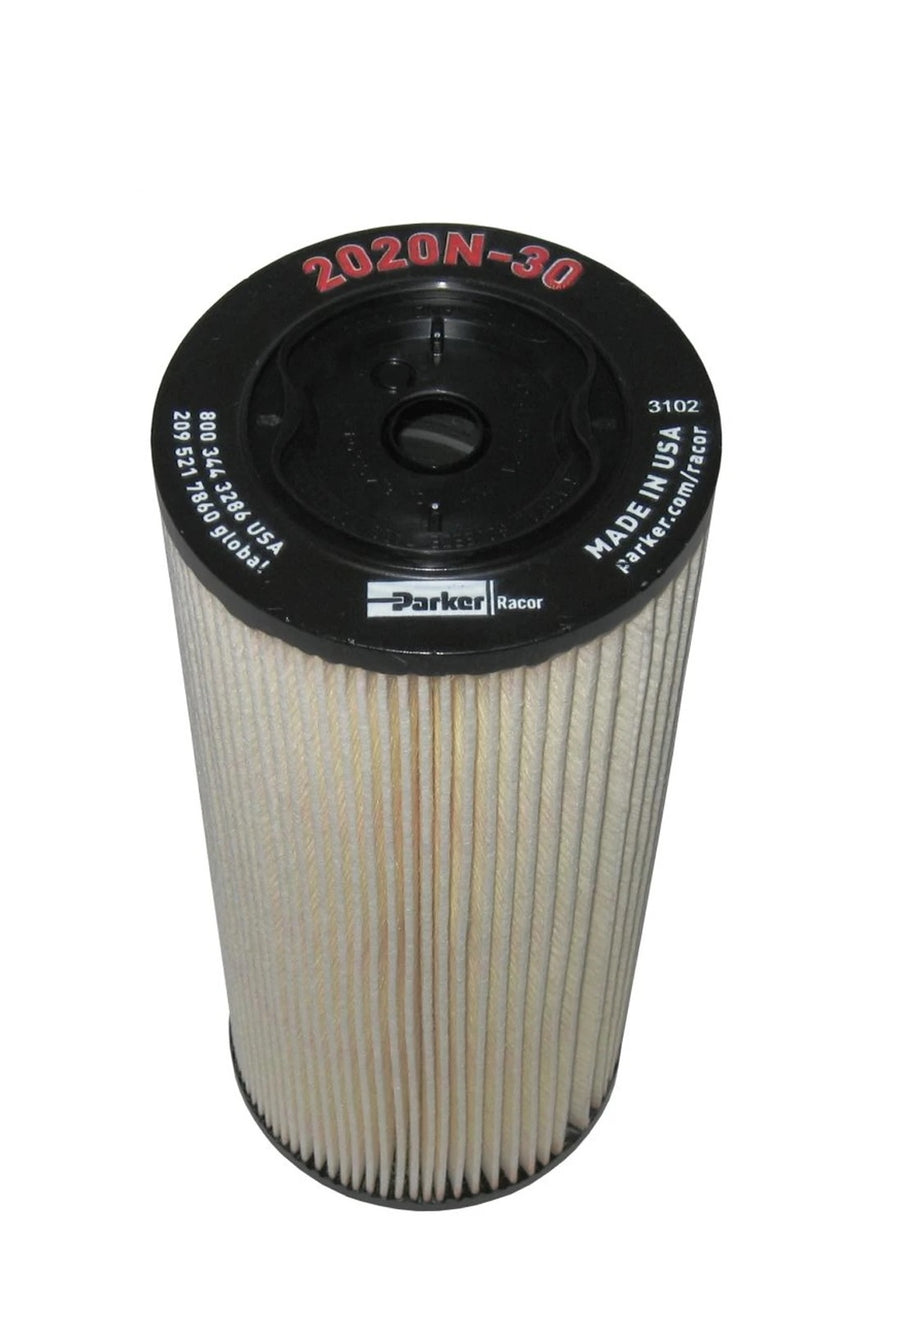 2020N-30 Racor Fuel Filter Element 30 Microns (Pack of 2), Cross Reference Donaldson P552024, Fleetguard FS20203